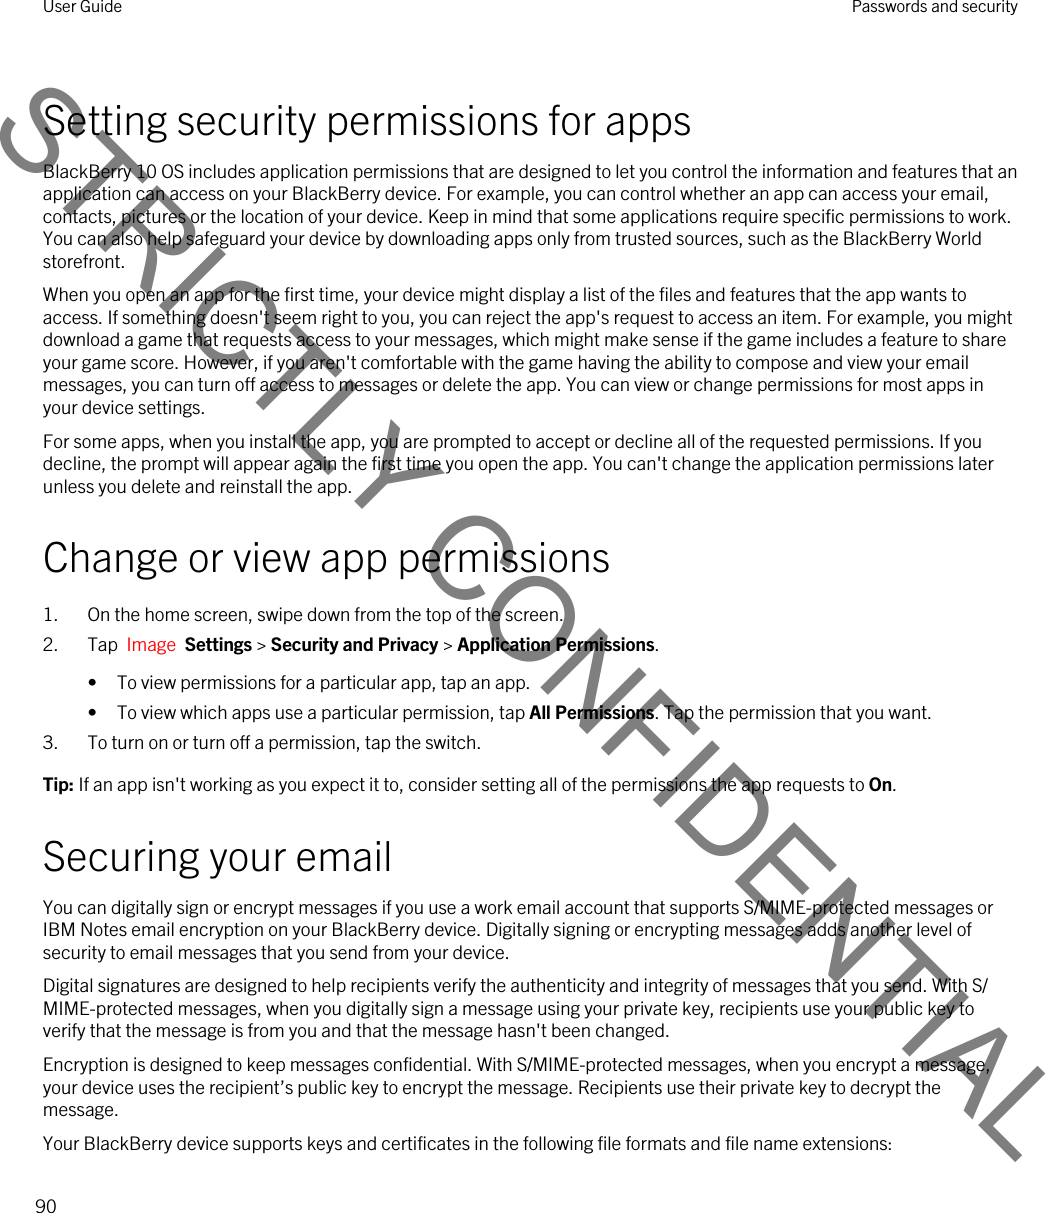 Setting security permissions for appsBlackBerry 10 OS includes application permissions that are designed to let you control the information and features that an application can access on your BlackBerry device. For example, you can control whether an app can access your email, contacts, pictures or the location of your device. Keep in mind that some applications require specific permissions to work. You can also help safeguard your device by downloading apps only from trusted sources, such as the BlackBerry World storefront.When you open an app for the first time, your device might display a list of the files and features that the app wants to access. If something doesn&apos;t seem right to you, you can reject the app&apos;s request to access an item. For example, you might download a game that requests access to your messages, which might make sense if the game includes a feature to share your game score. However, if you aren&apos;t comfortable with the game having the ability to compose and view your email messages, you can turn off access to messages or delete the app. You can view or change permissions for most apps in your device settings.For some apps, when you install the app, you are prompted to accept or decline all of the requested permissions. If you decline, the prompt will appear again the first time you open the app. You can&apos;t change the application permissions later unless you delete and reinstall the app.Change or view app permissions1. On the home screen, swipe down from the top of the screen.2. Tap  Image  Settings &gt; Security and Privacy &gt; Application Permissions. • To view permissions for a particular app, tap an app.• To view which apps use a particular permission, tap All Permissions. Tap the permission that you want.3. To turn on or turn off a permission, tap the switch.Tip: If an app isn&apos;t working as you expect it to, consider setting all of the permissions the app requests to On.Securing your emailYou can digitally sign or encrypt messages if you use a work email account that supports S/MIME-protected messages or IBM Notes email encryption on your BlackBerry device. Digitally signing or encrypting messages adds another level of security to email messages that you send from your device.Digital signatures are designed to help recipients verify the authenticity and integrity of messages that you send. With S/MIME-protected messages, when you digitally sign a message using your private key, recipients use your public key to verify that the message is from you and that the message hasn&apos;t been changed.Encryption is designed to keep messages confidential. With S/MIME-protected messages, when you encrypt a message, your device uses the recipient’s public key to encrypt the message. Recipients use their private key to decrypt the message.Your BlackBerry device supports keys and certificates in the following file formats and file name extensions:User Guide Passwords and security90STRICTLY CONFIDENTIAL